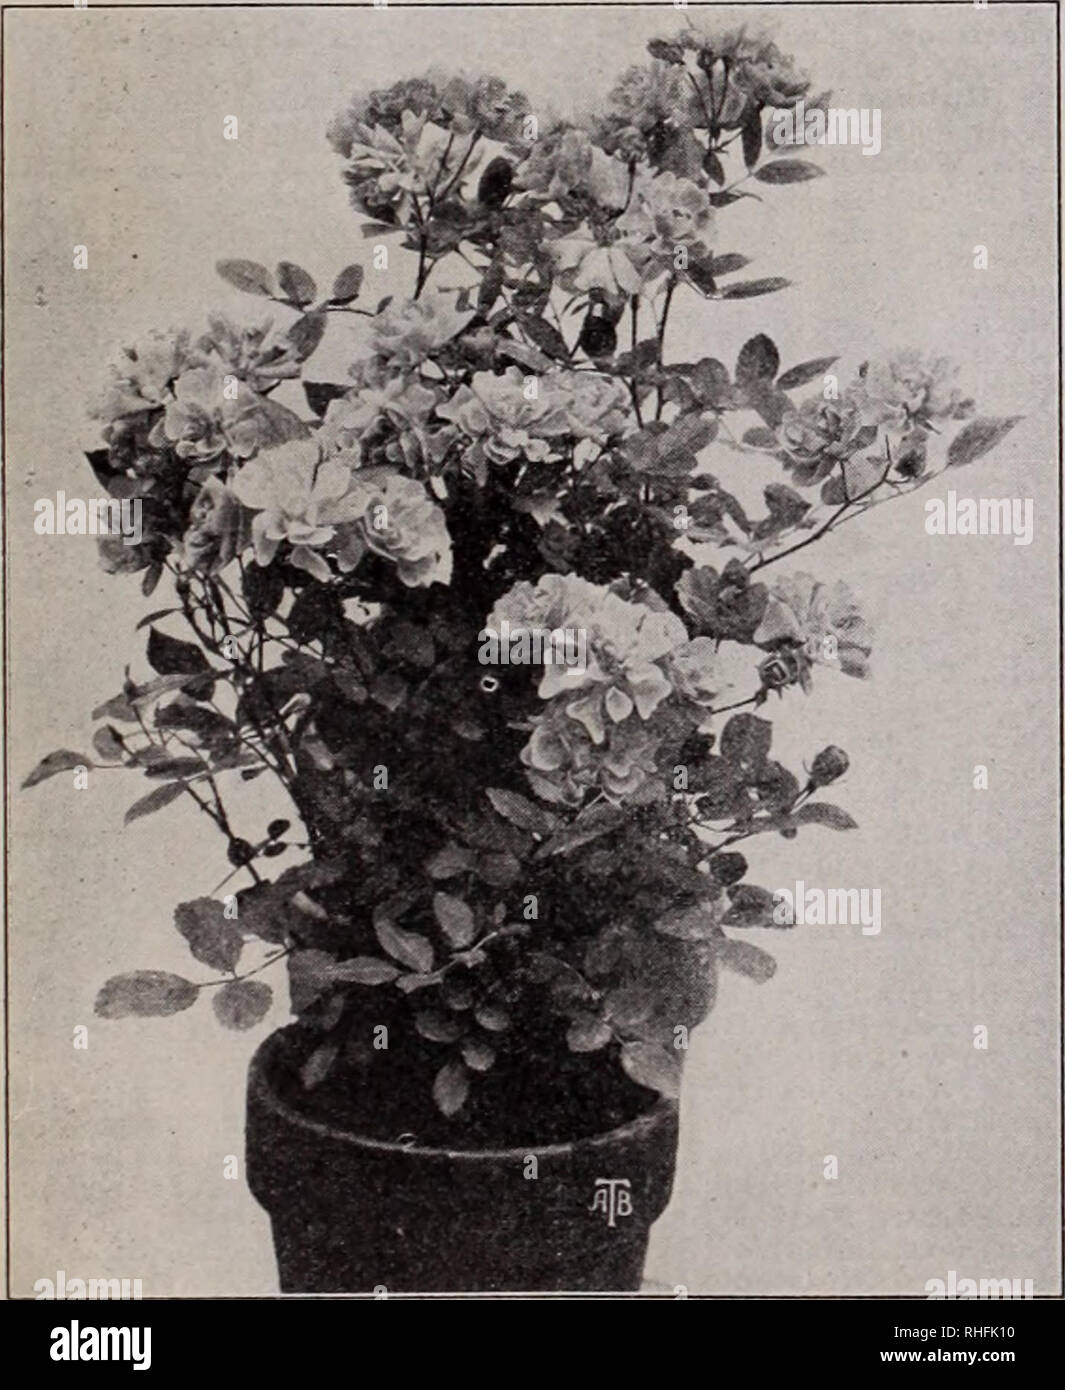 . Boddington's quality bulbs, seeds and plants / Arthur T. Boddington.. Nursery Catalogue. BODDINGTON'S ^A4&lt;ltltA/ R^SES 137 Standard, or Tree Roses (Grafted on Rugosa Stock) Tree Baby Ramblers, etc. BABY DOROTHY (Grown as a Standard). ' This variety has created quite a sensation wiien exhibited at the English National Rose Society's and otlier shows. &quot;Baby Dorothy,&quot; when planted out, blooms perpetually from spring until autumn. Flowers rosy pink. 75 cts. each, $3 50 for 5. MME. NORBERT LEVAVASSEUR BABY RAMBLER (Grown as a Standard). See description opposite. 50 cts. each, $5 per  Stock Photo